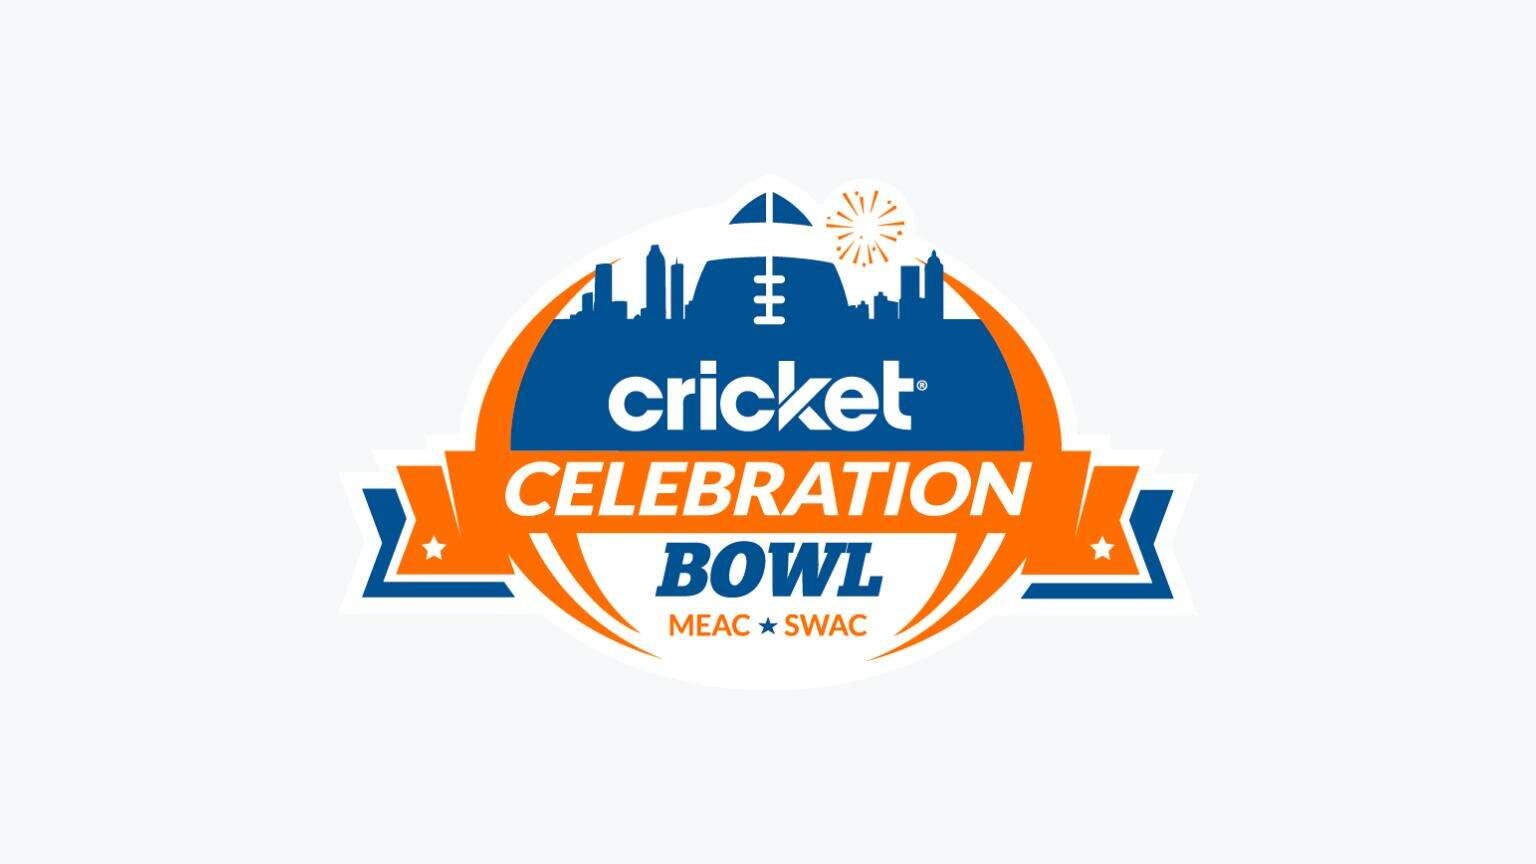 Can You Watch the 2021 Cricket Celebration Bowl Jackson State vs